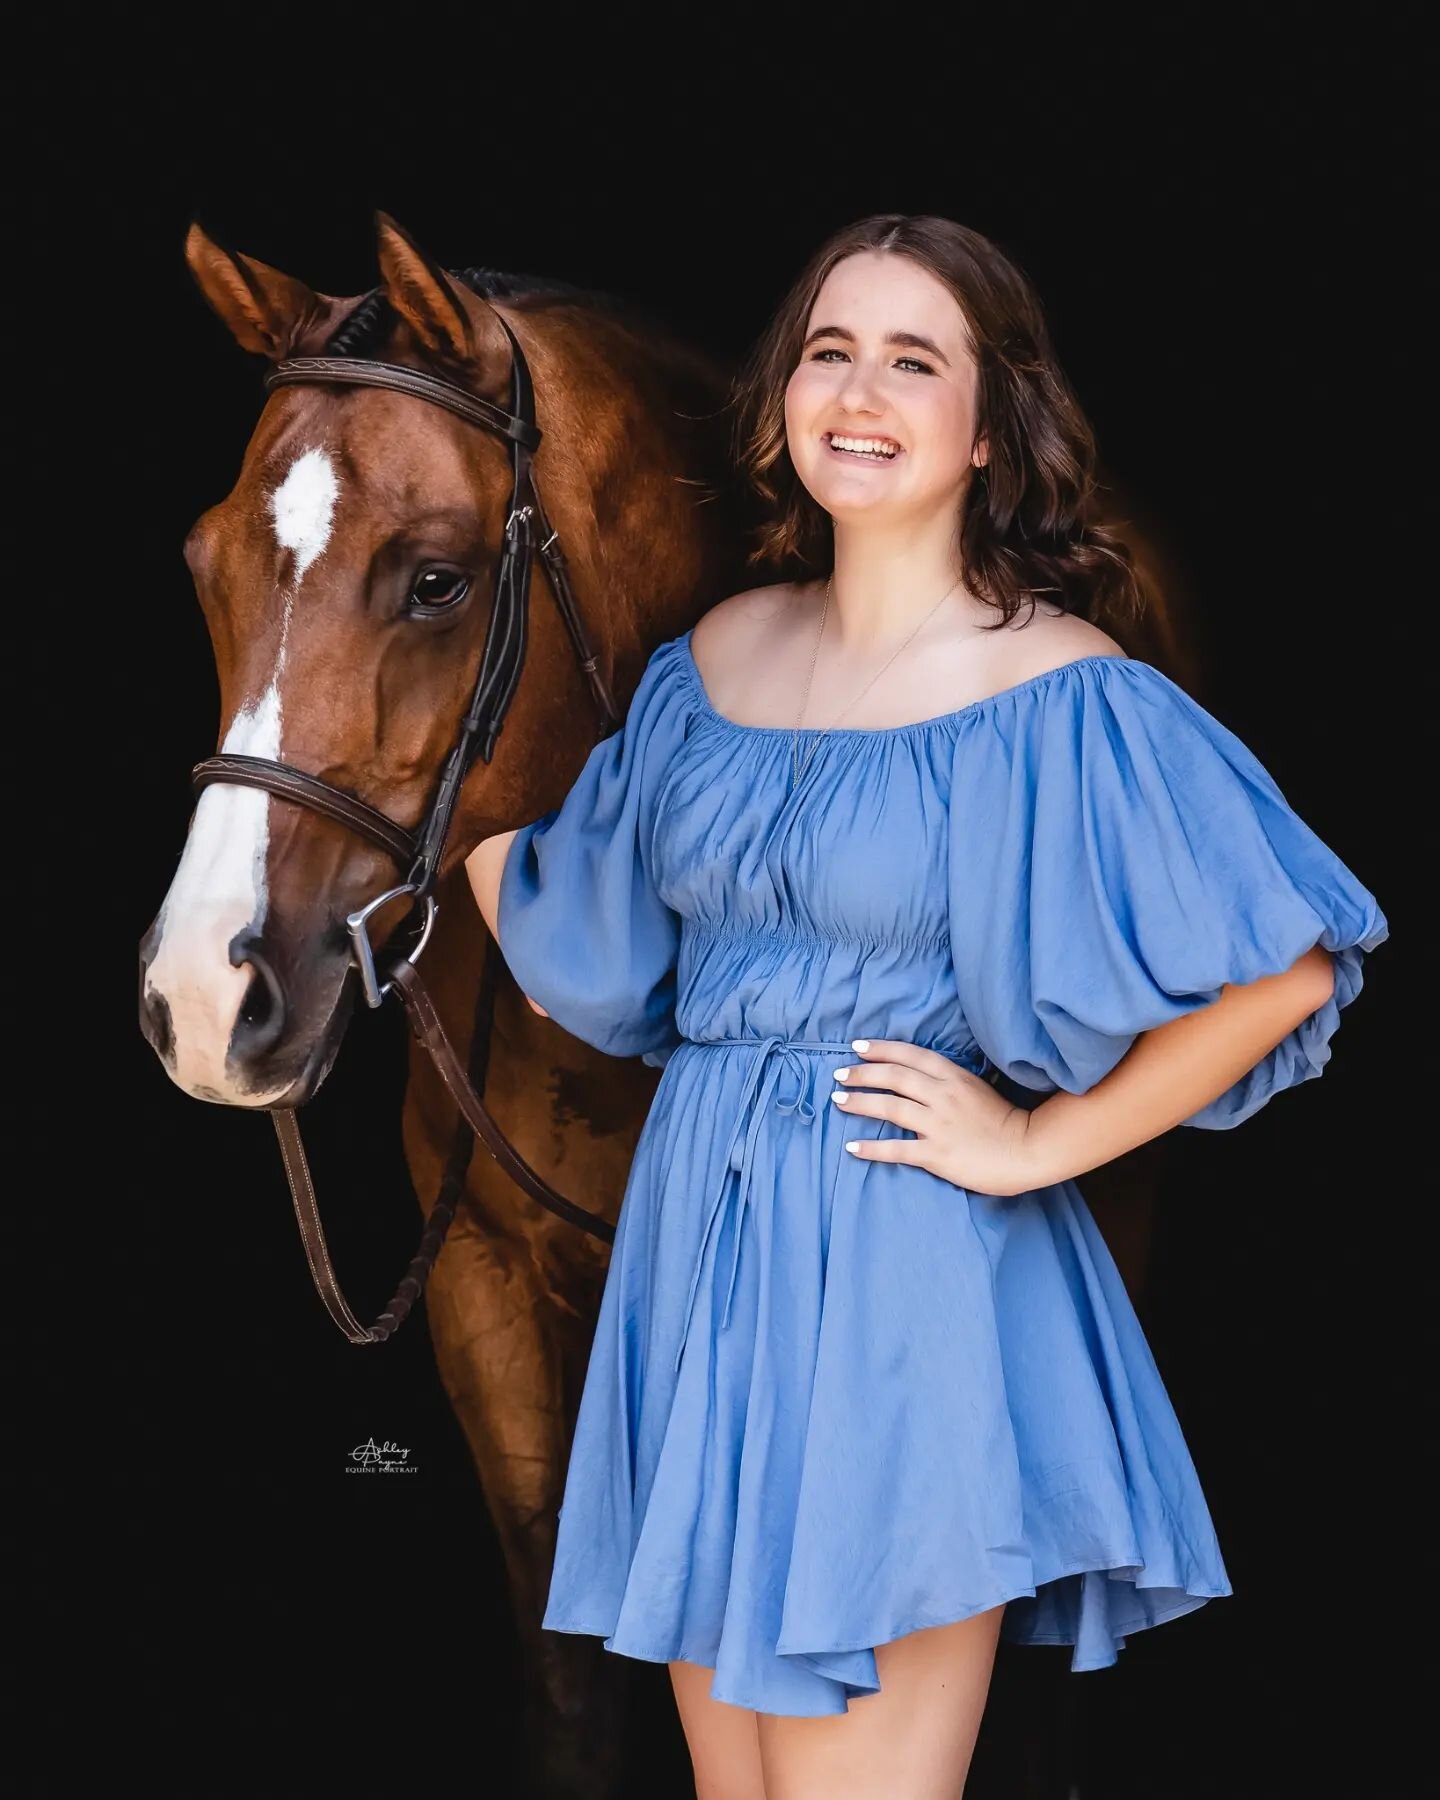 Pro tip: bring your favorite 🐴 to your senior portrait session ✨

Hair &amp; makeup by @morganebright 👸